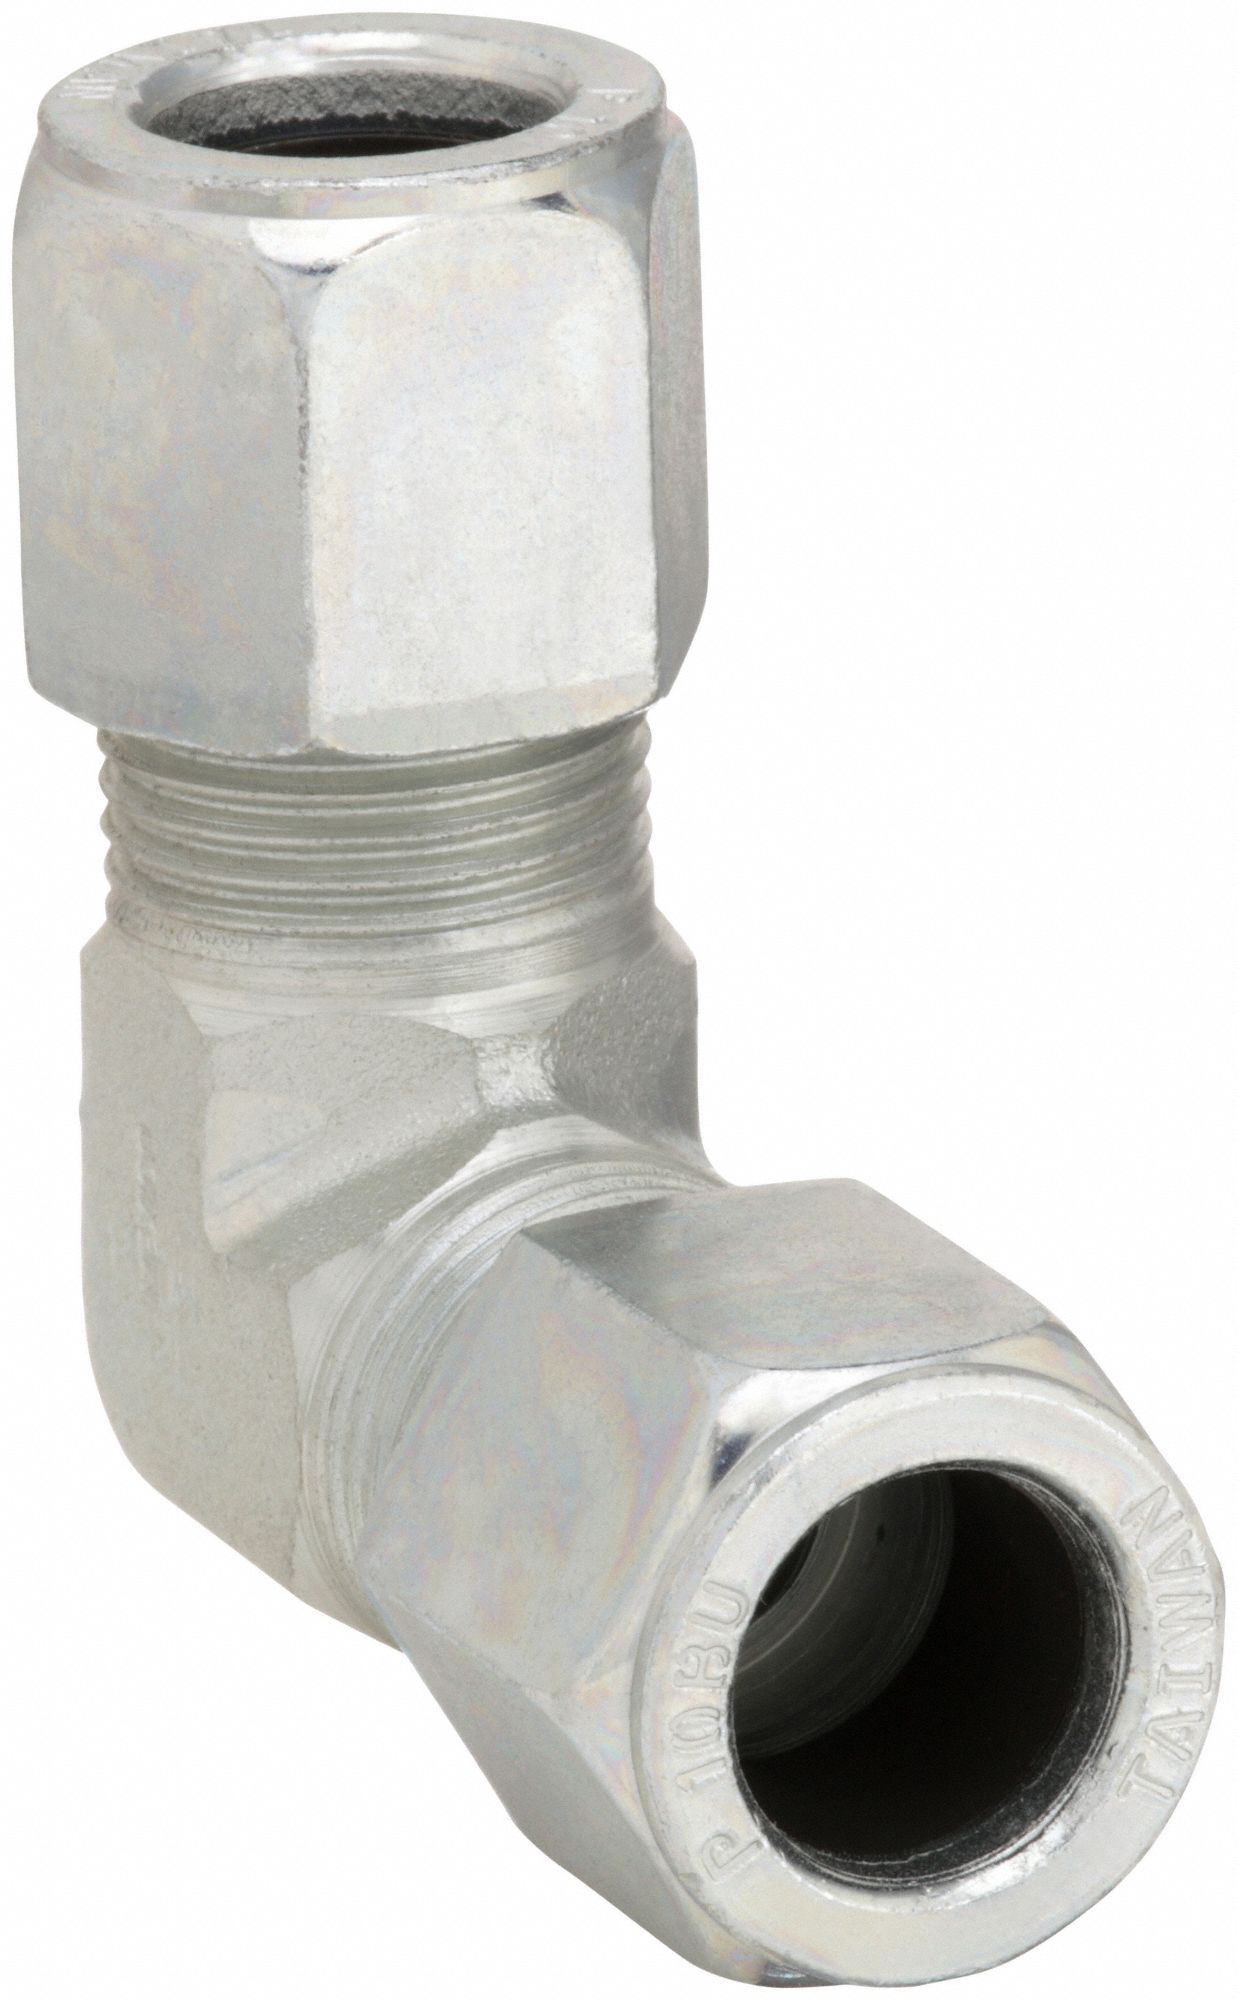 Flareless Tube Compression Fittings - Imperial Sizes